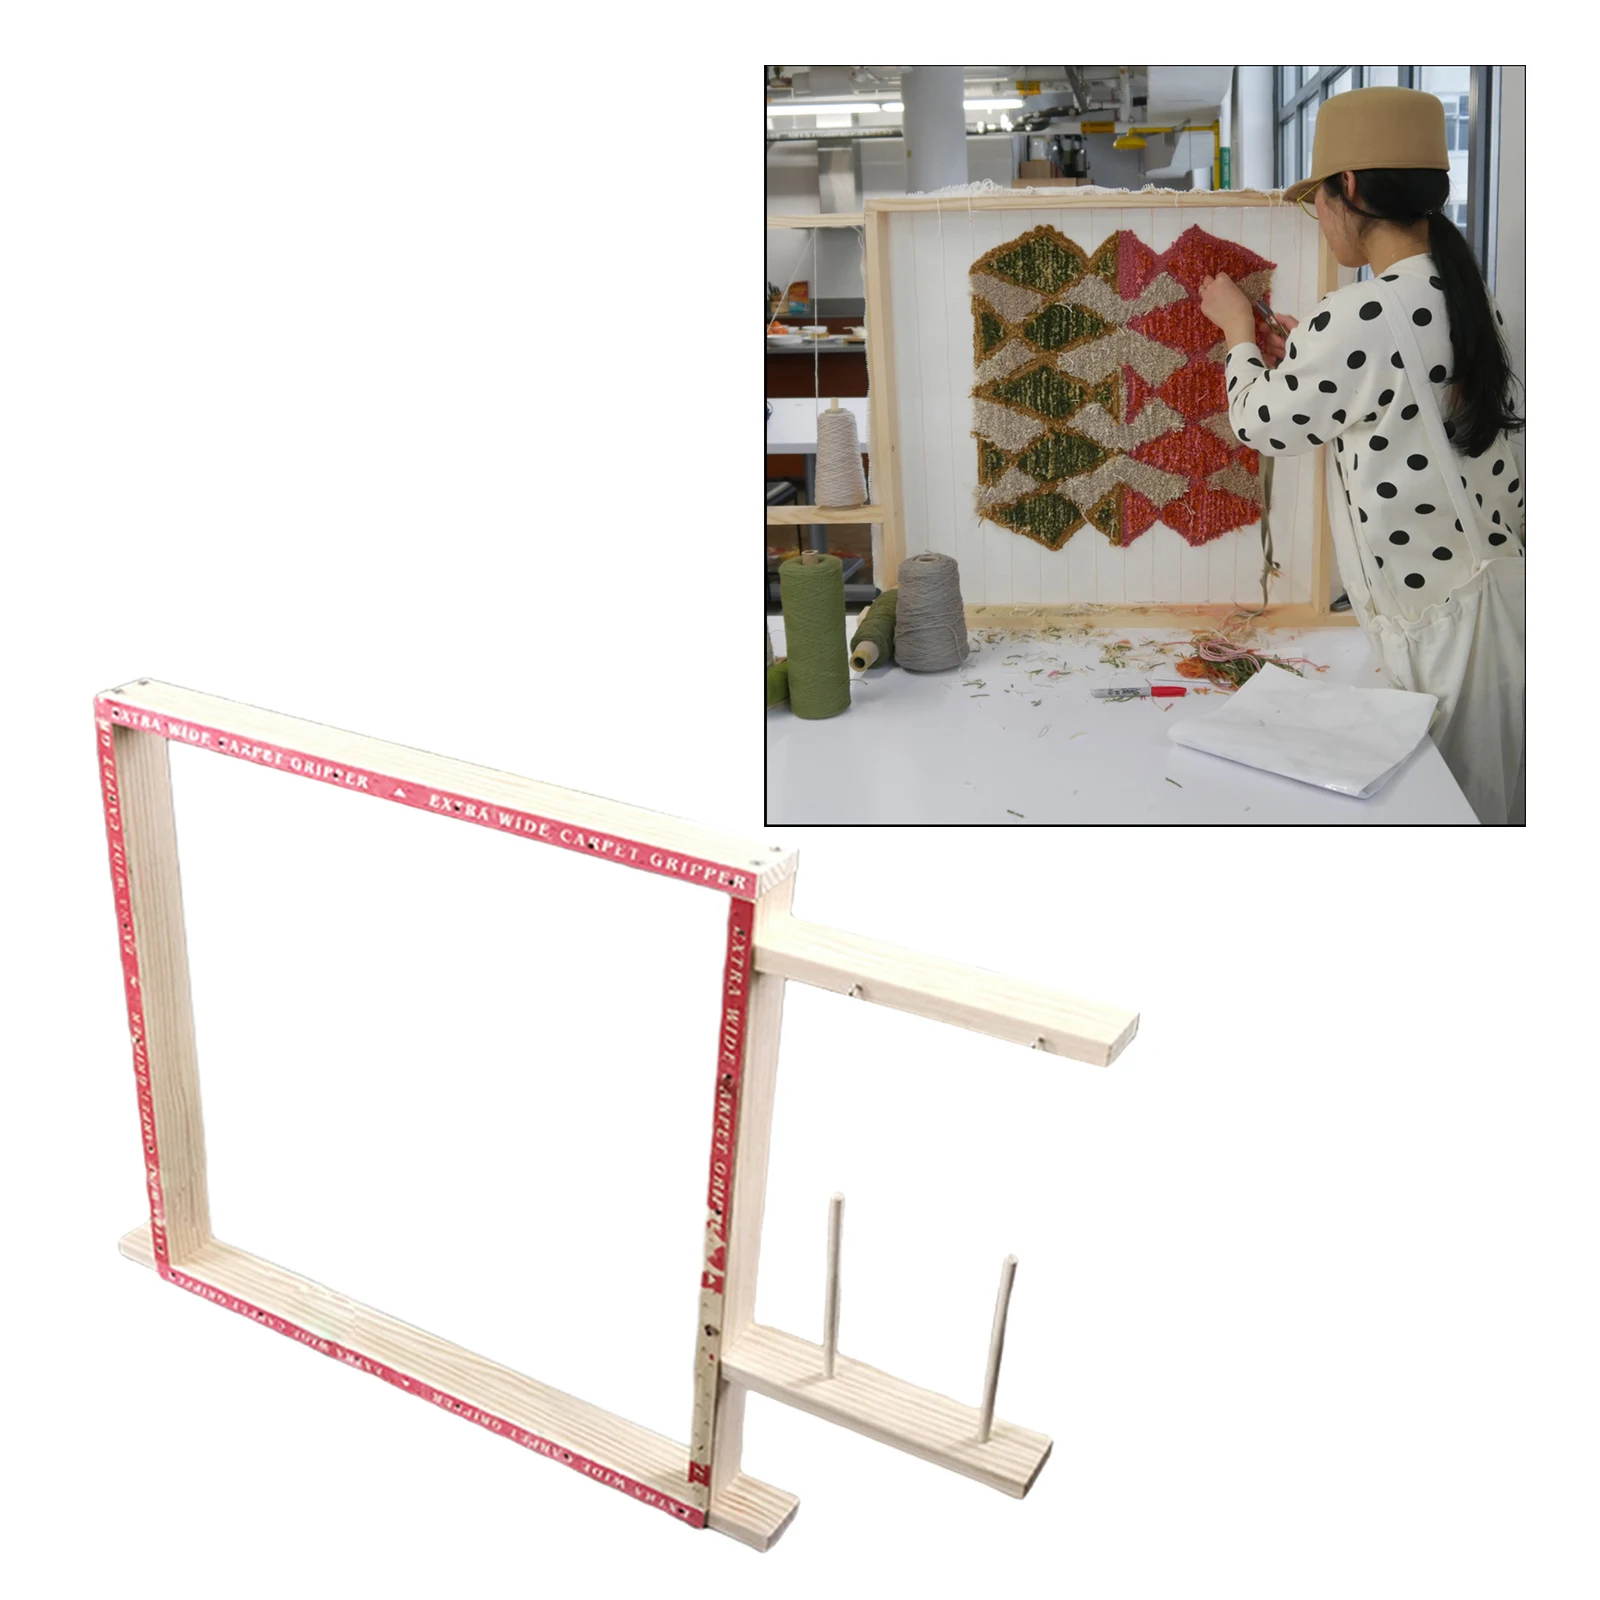 Tufting Carpet Making Frame Tapestry on The Wall Making Tools, Suitable for Use with Tufting Guns